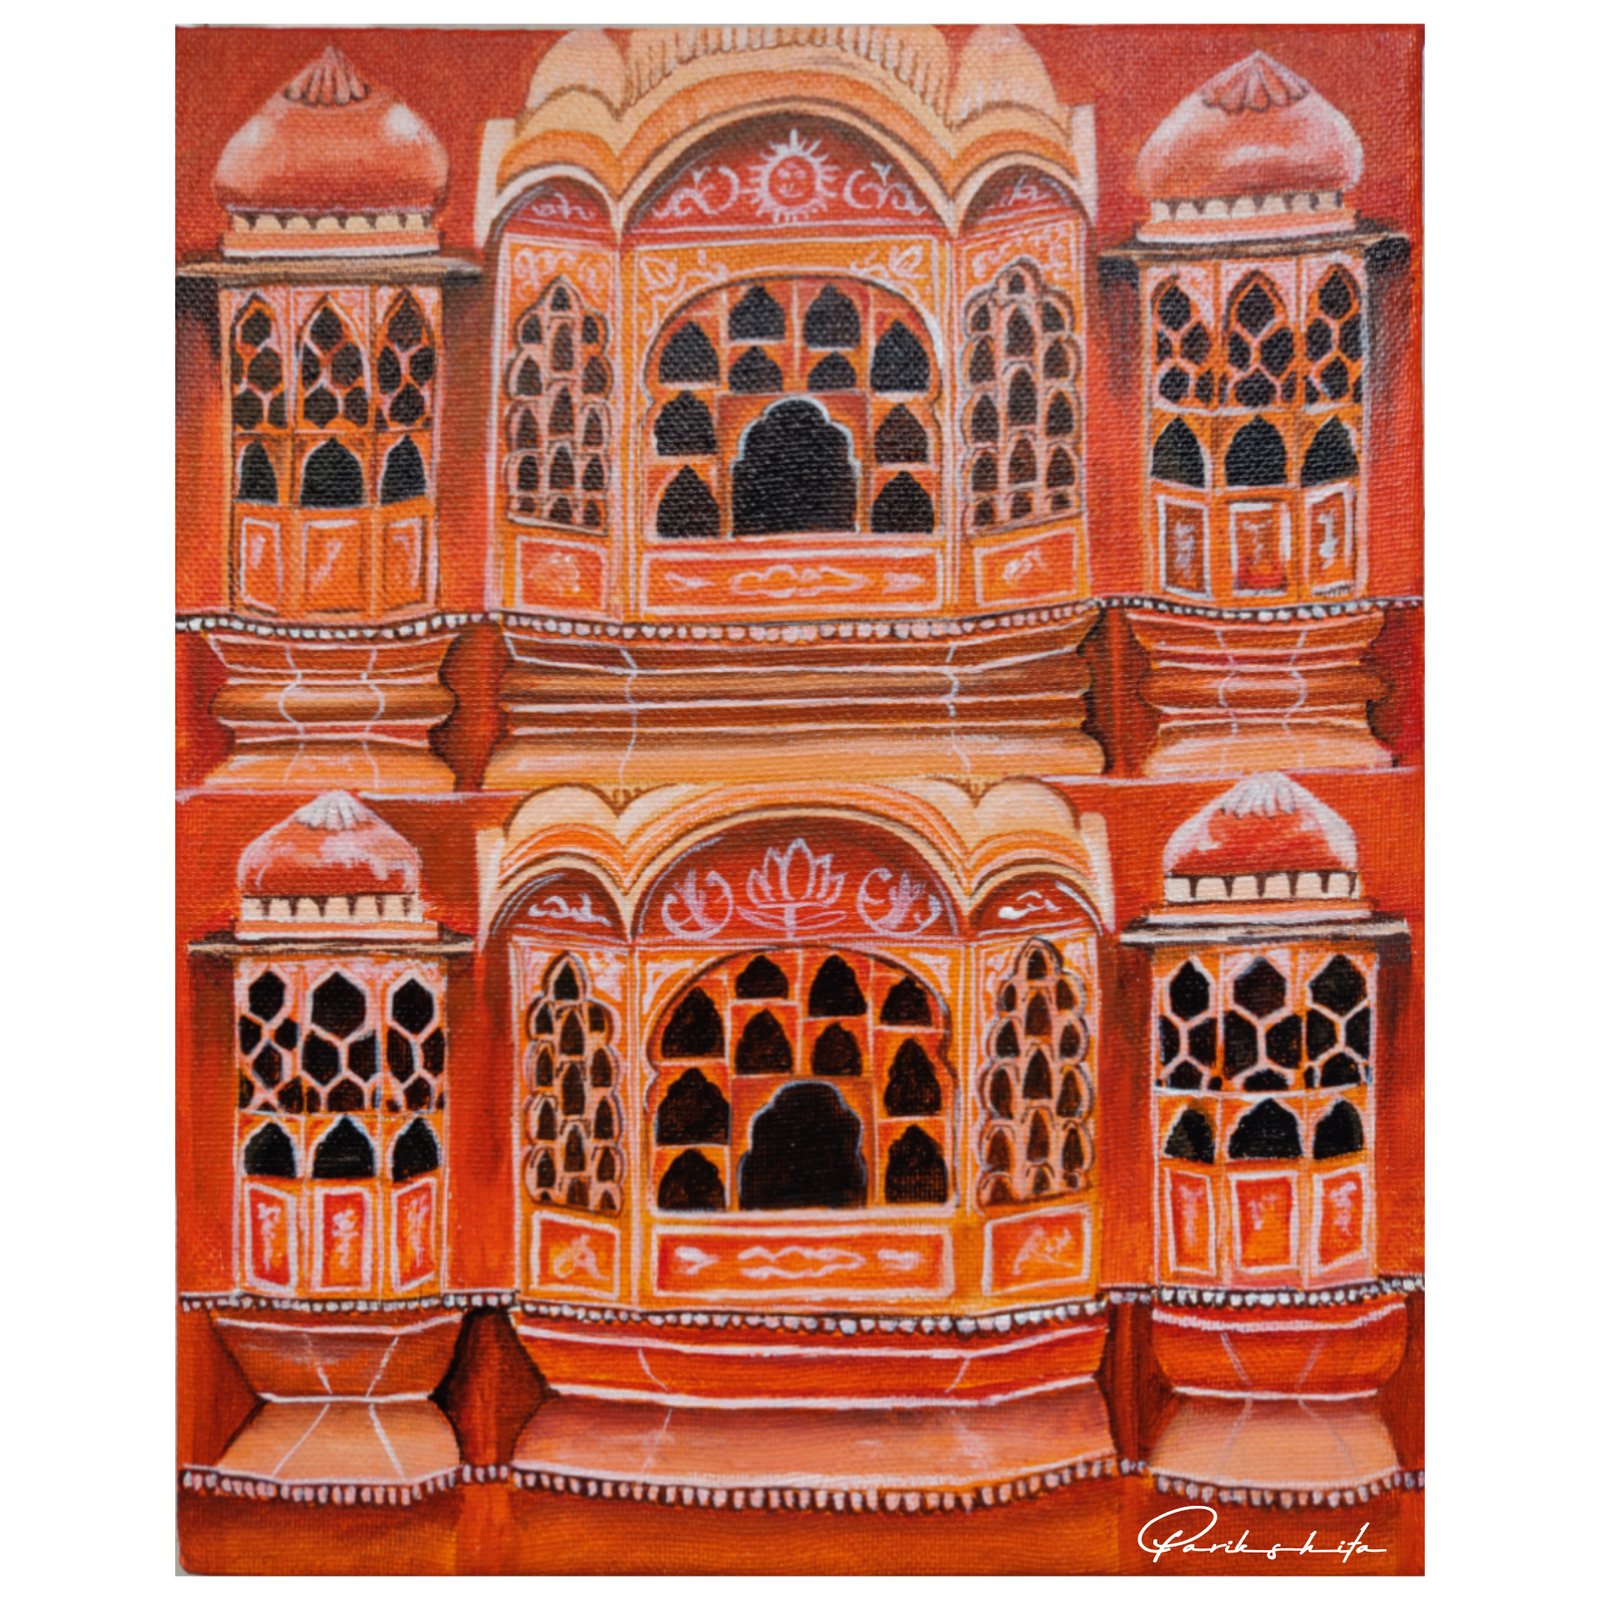 Hawa Mahal Painting, original canvas painting online, monument painting, Indian painting, acrylic canvas painting